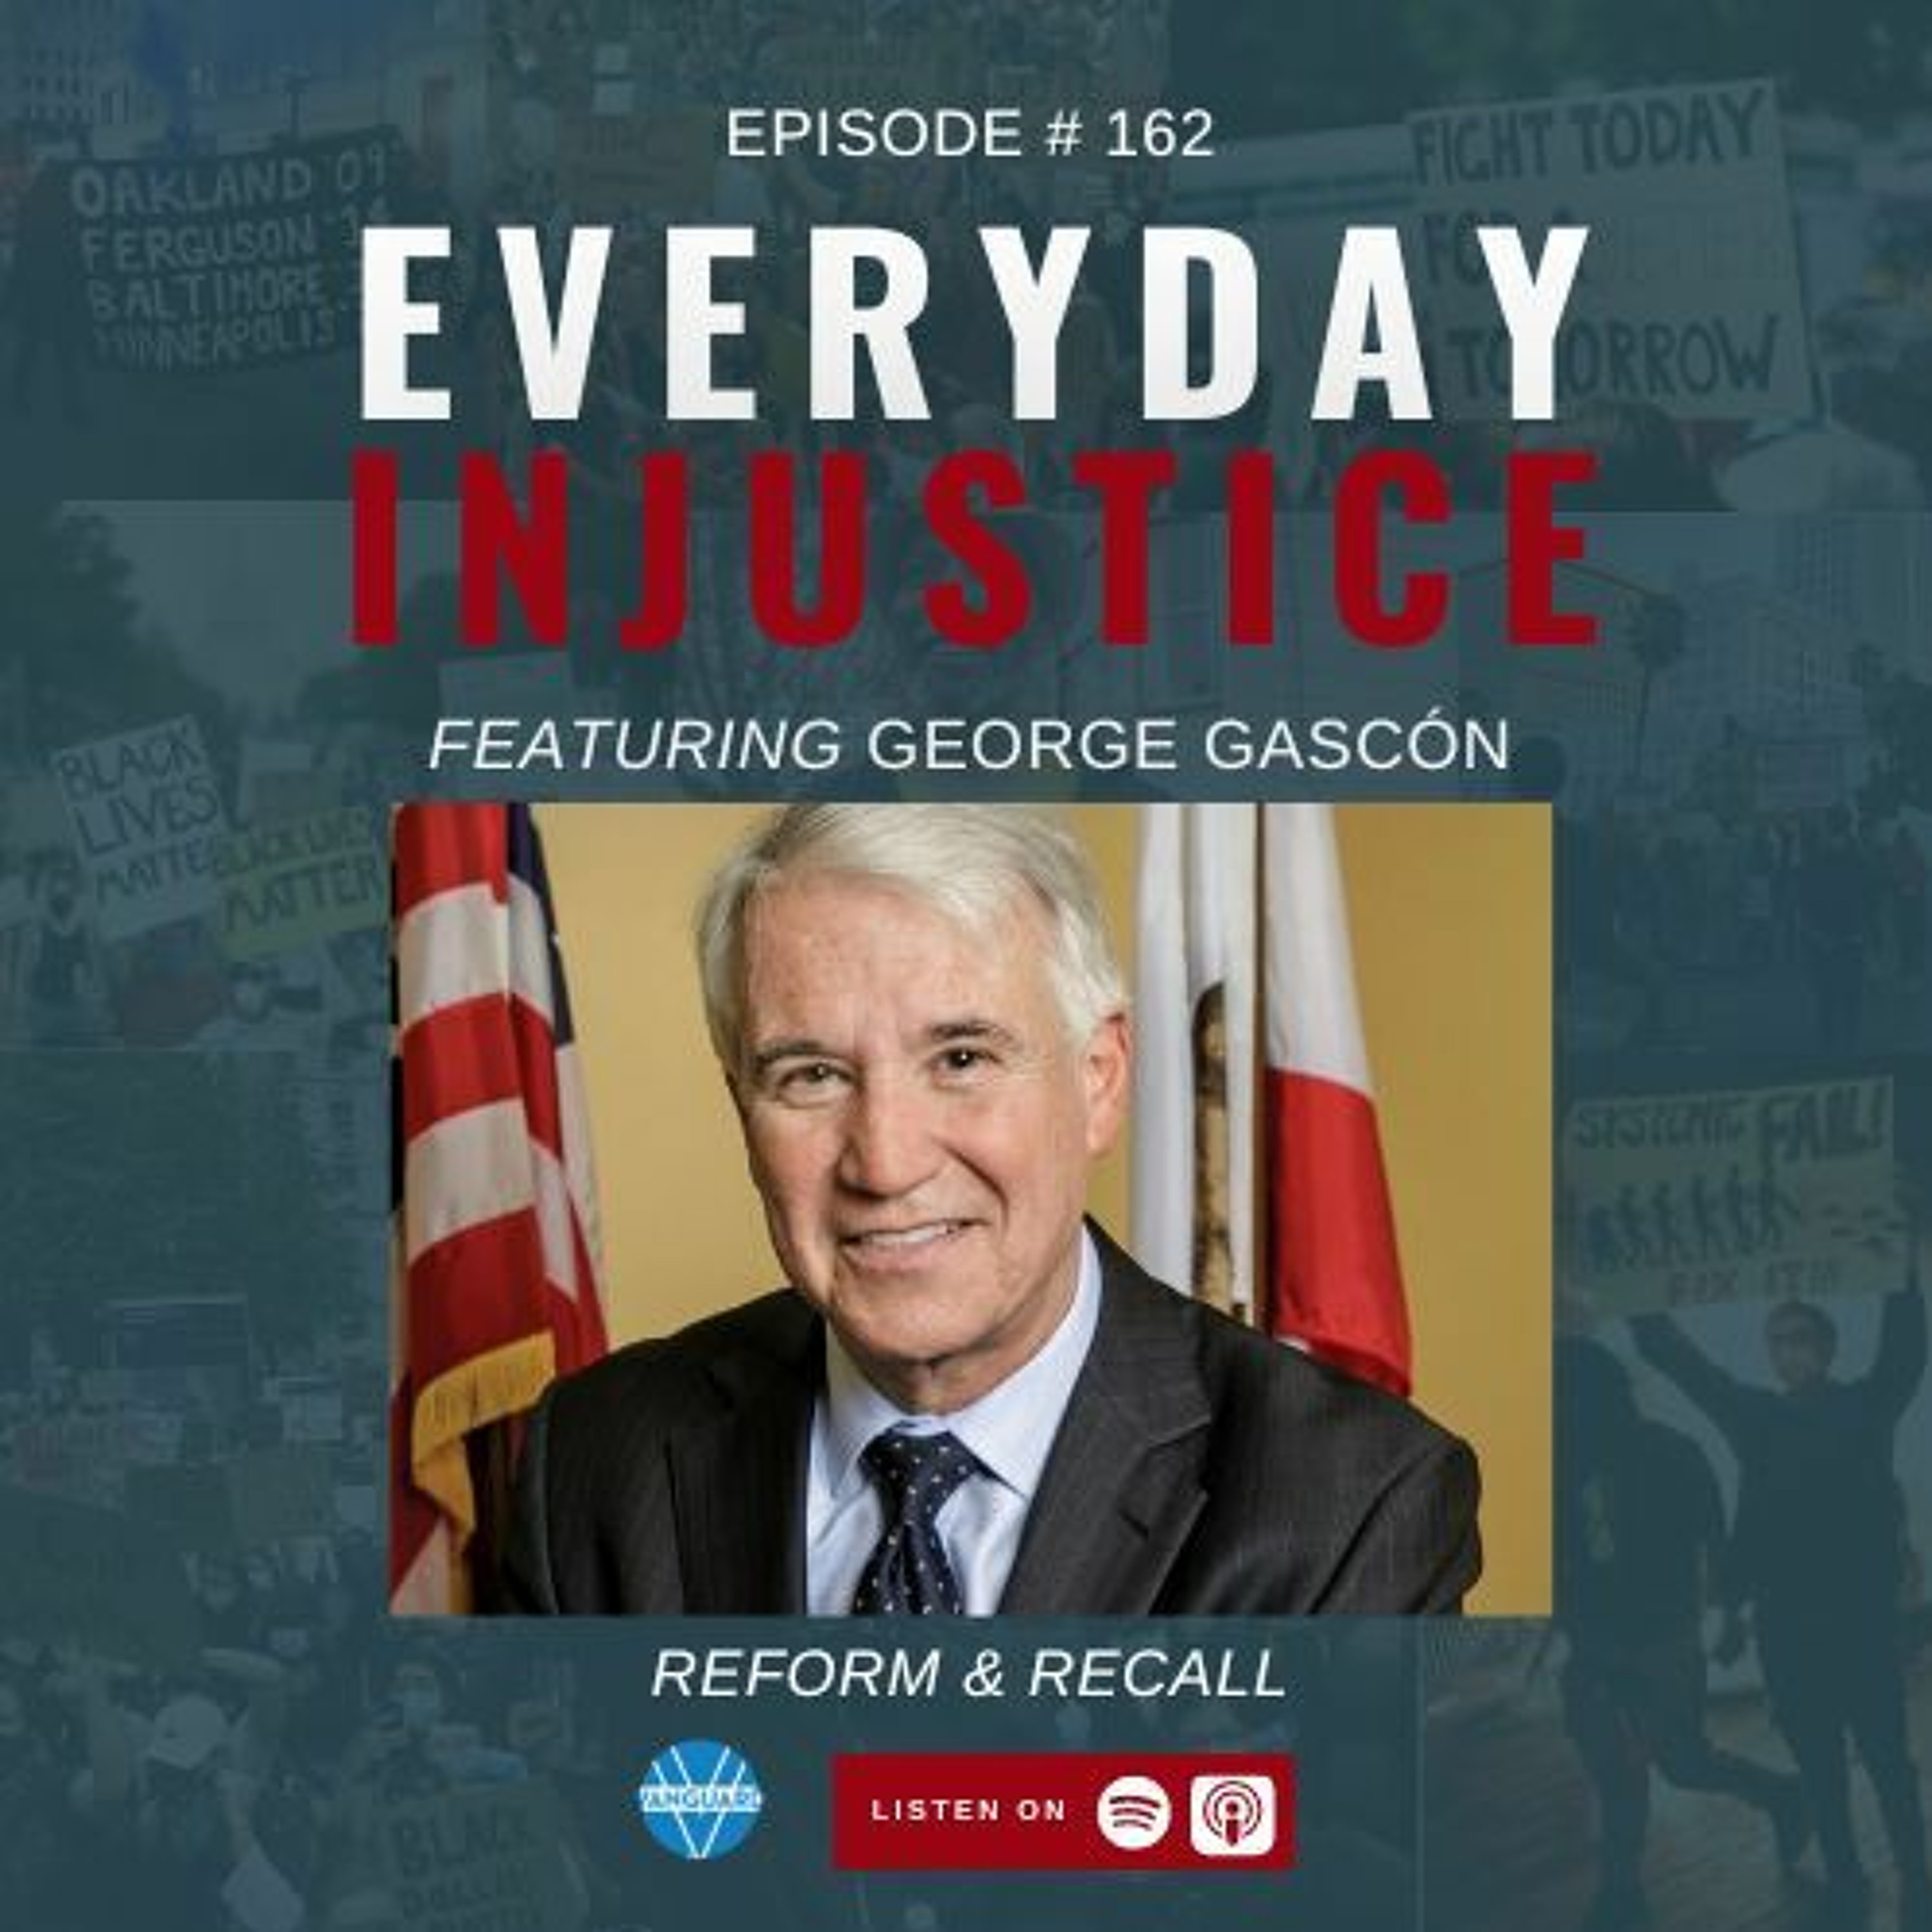 Everyday Injustice Episode 162: George Gascón Discusses Facing a Possible Recall